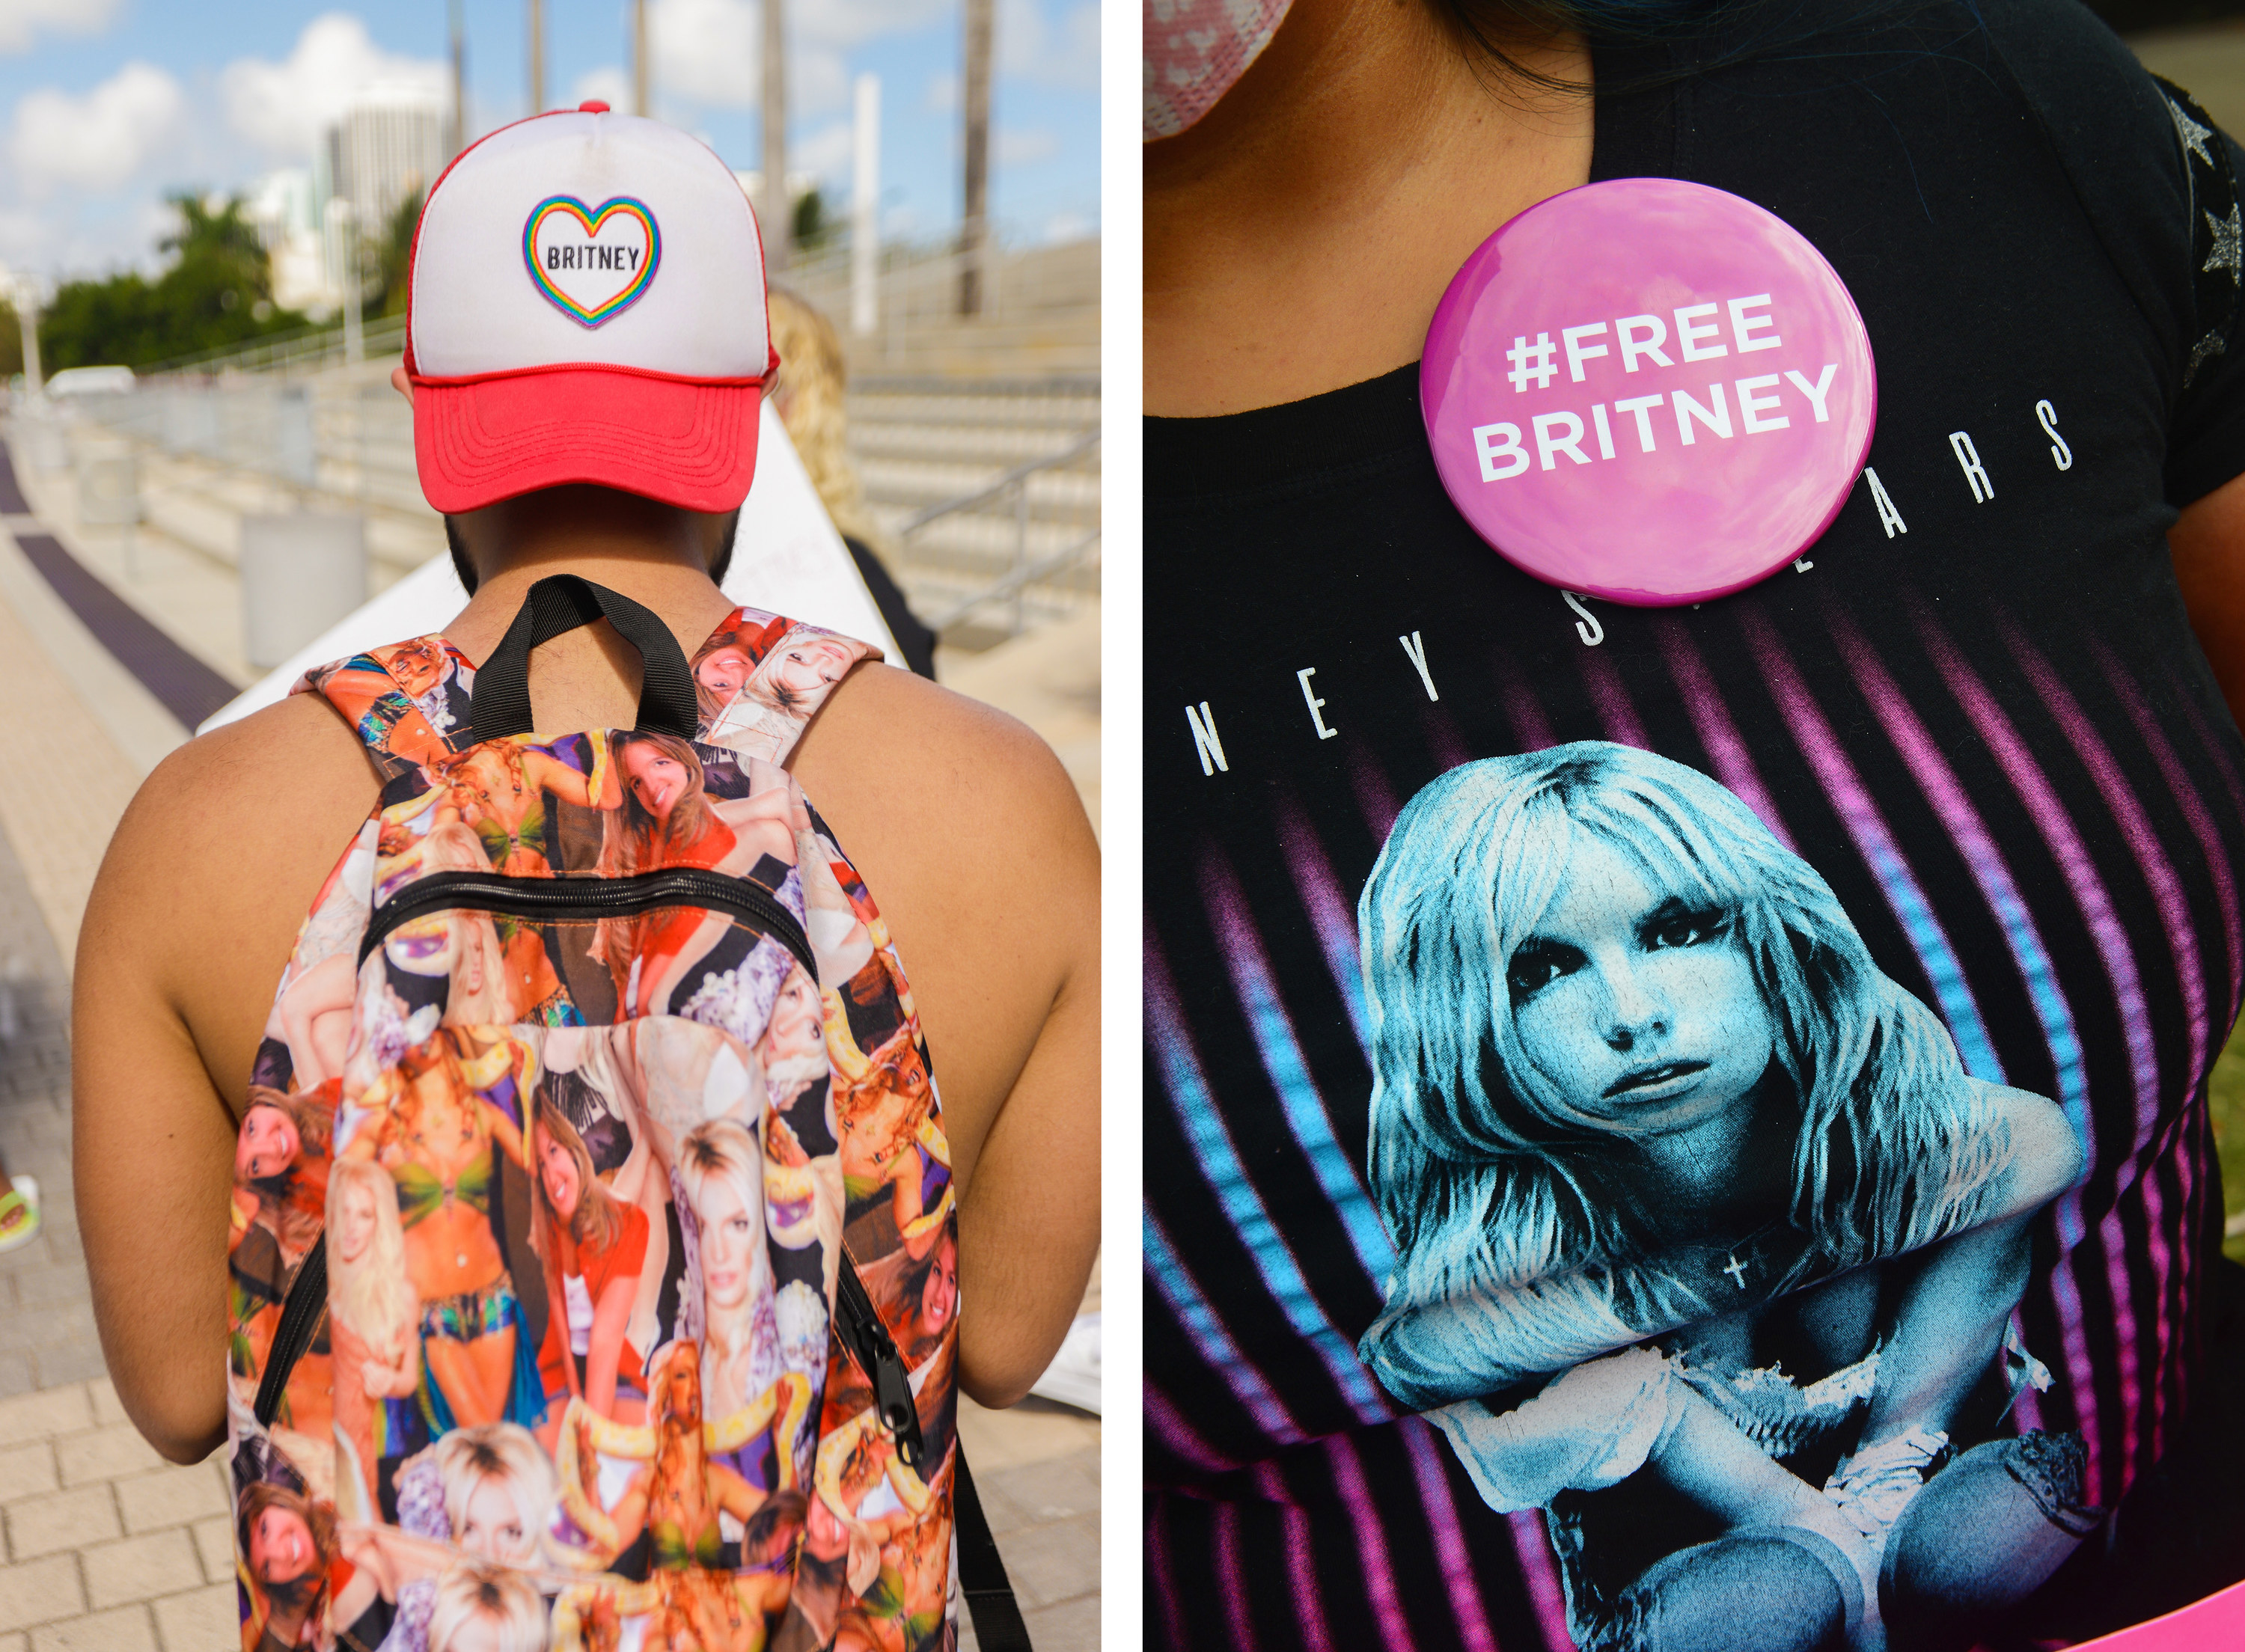 A person wears a backpack featuring a collage of Britney Spears photos, and another person wears a Free Britney pin on a Britney Spears t-shirt